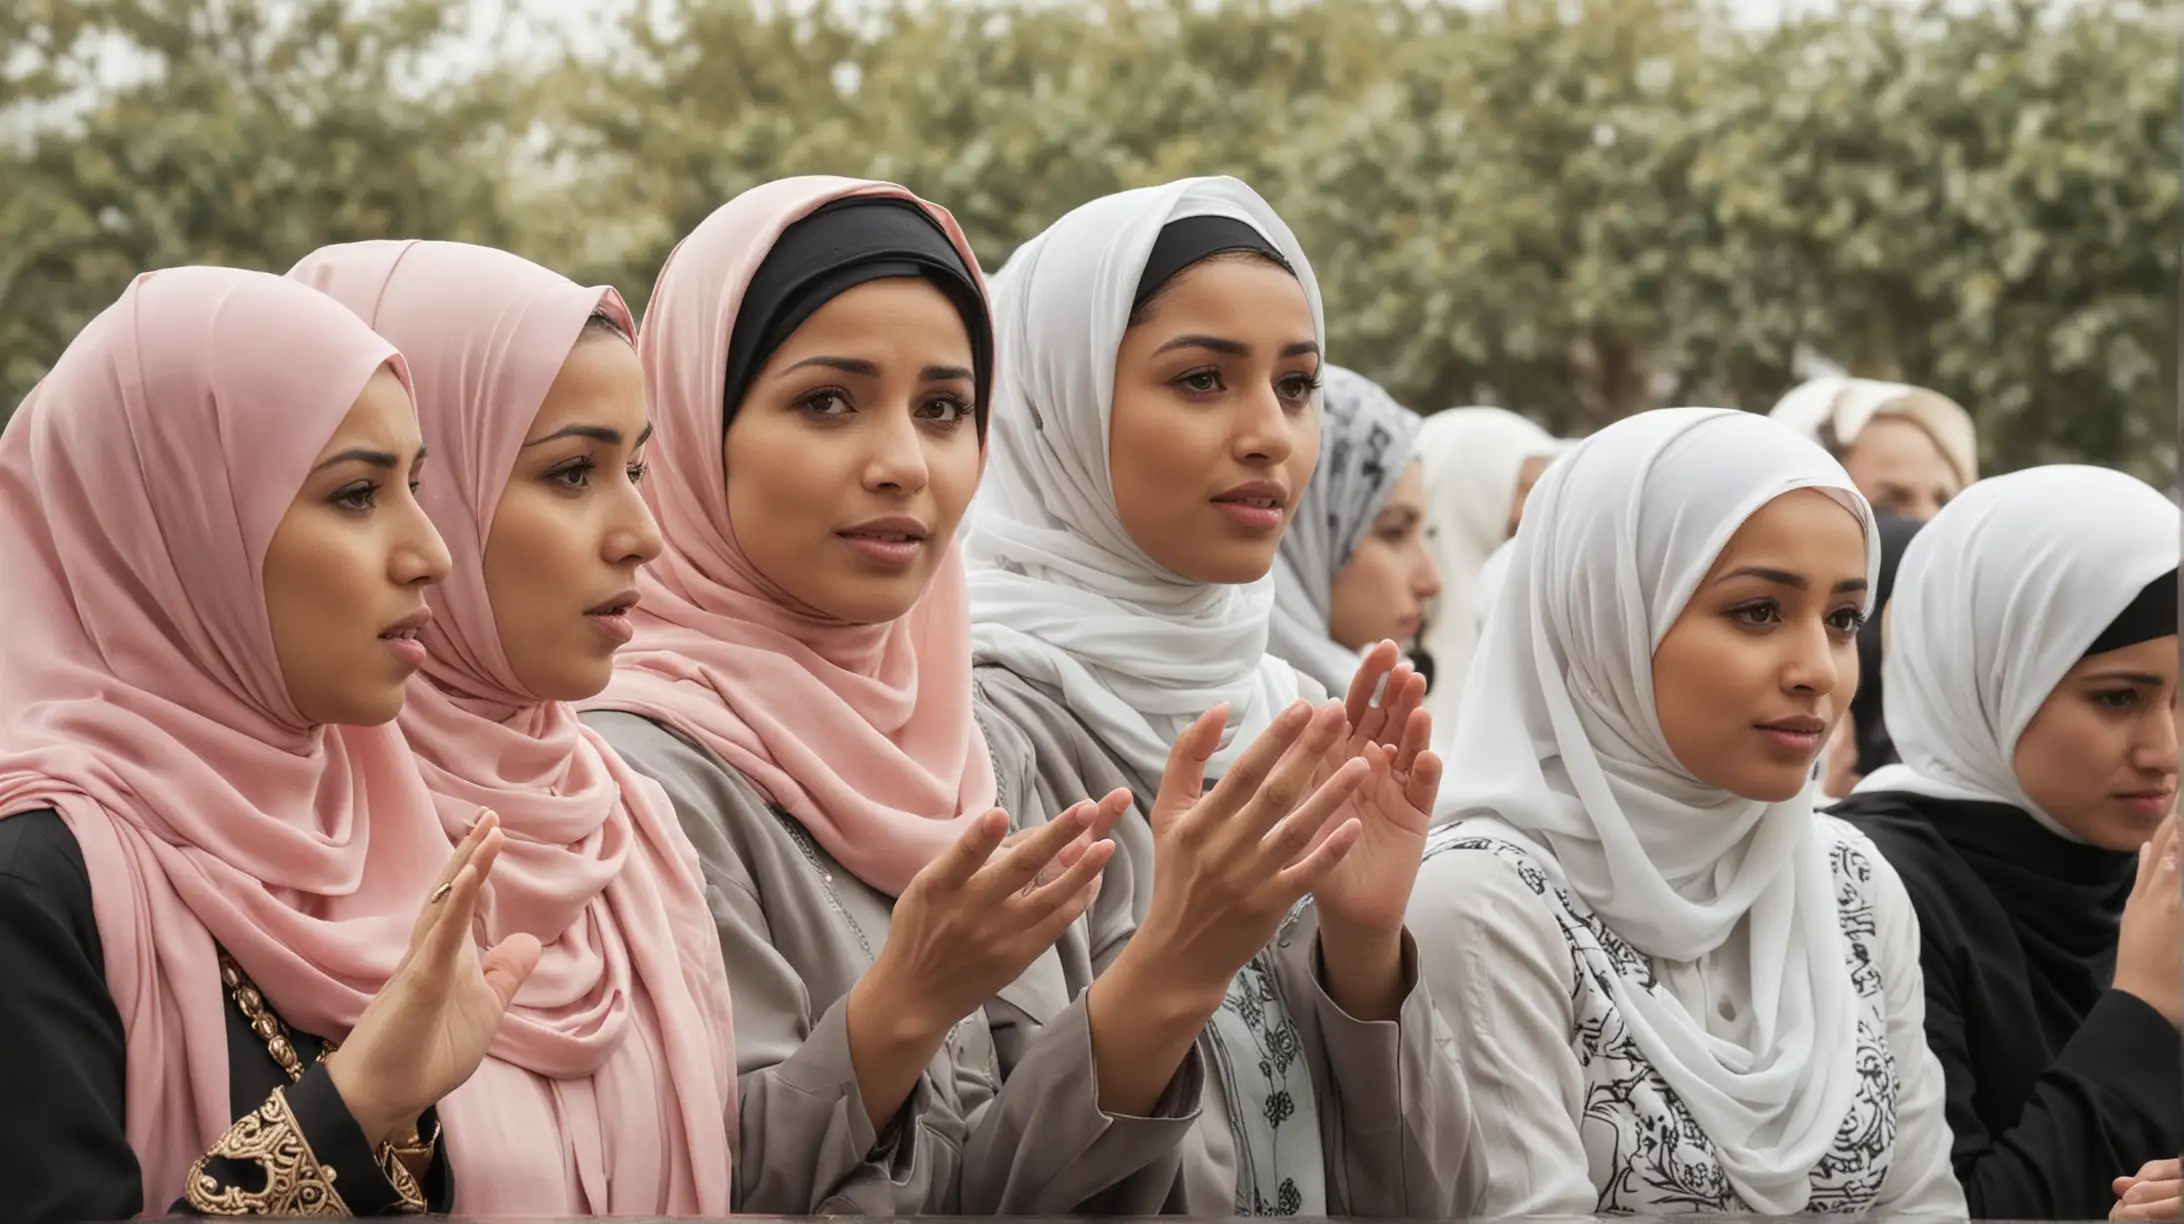 Muslim Woman Engaged in Emotional Conversation with Fellow Women